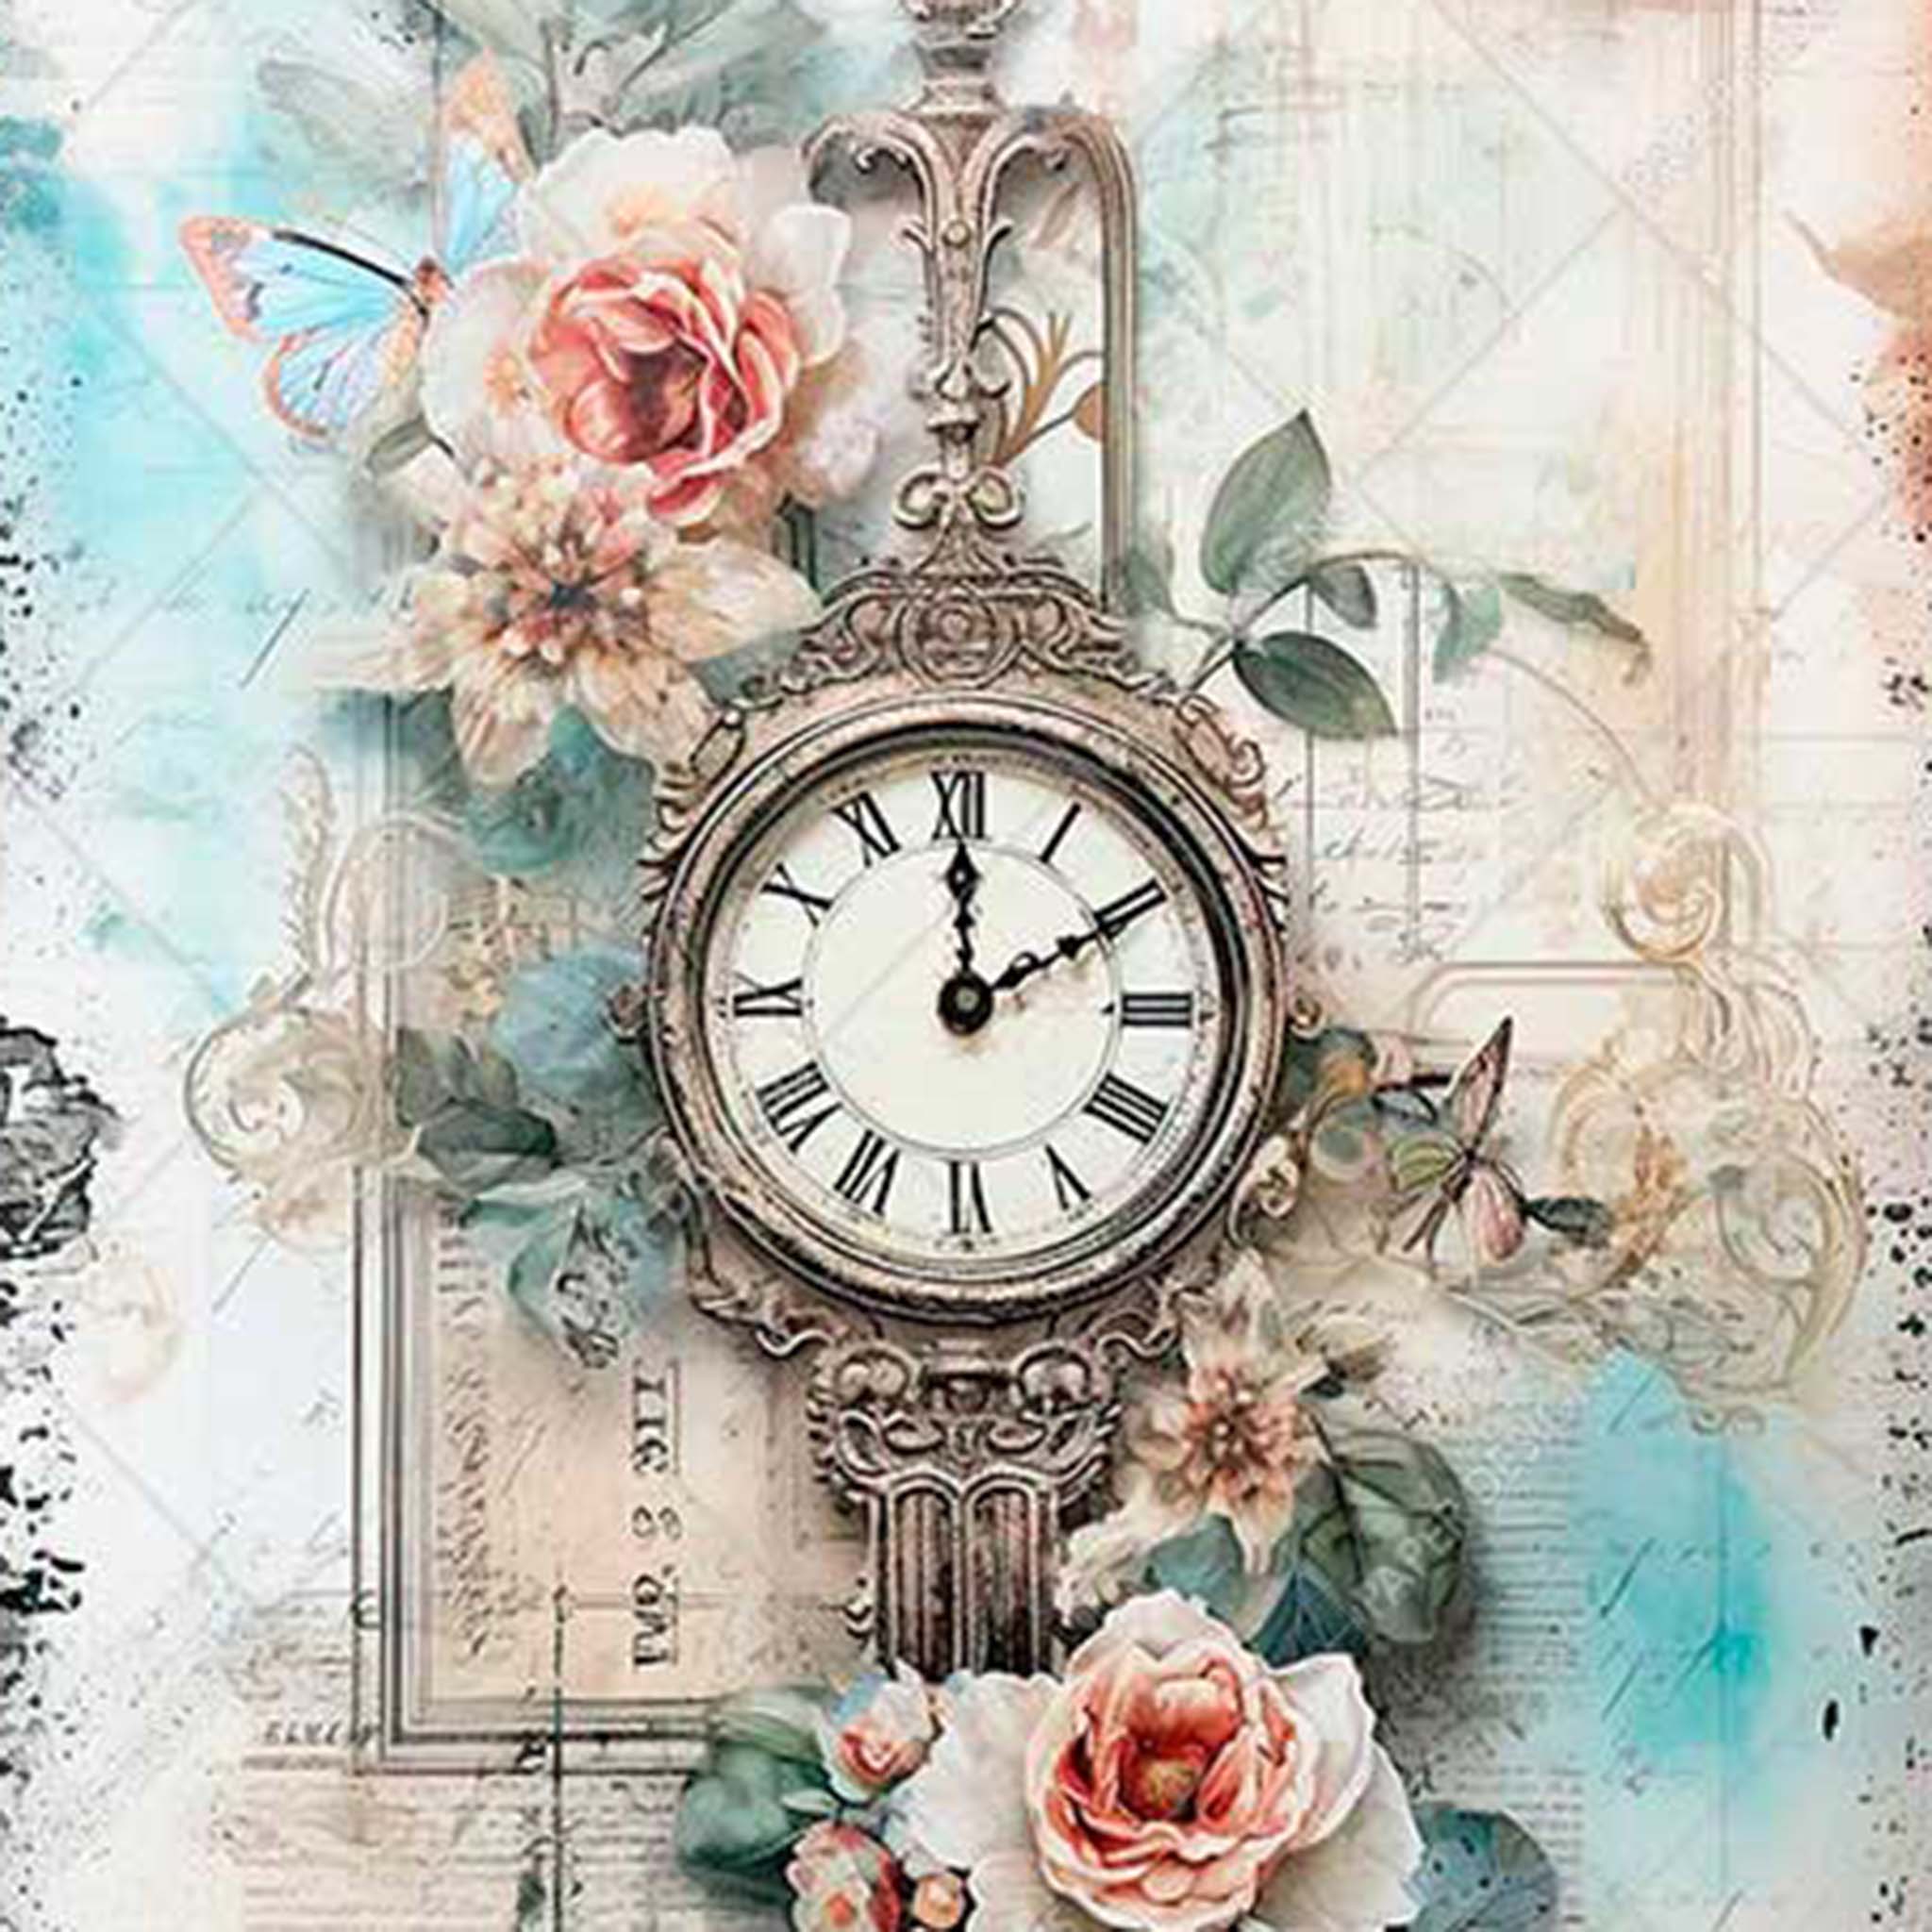 A4 rice paper design featuring an ornate clock surrounded by exquisite flowers.